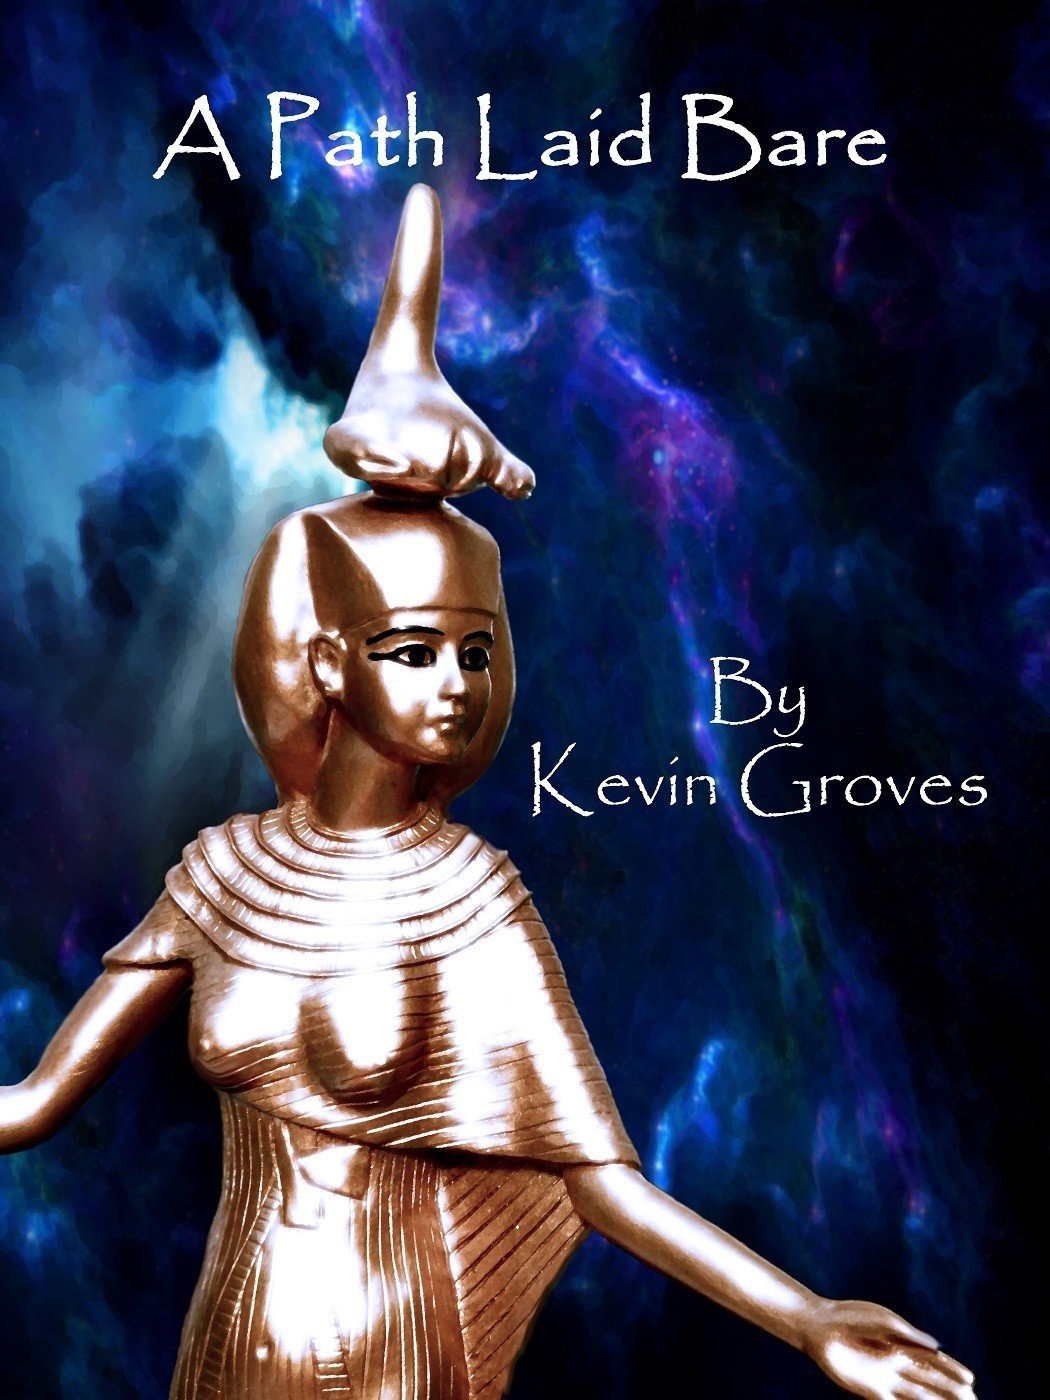 A Path Laid Bare by Kevin Groves